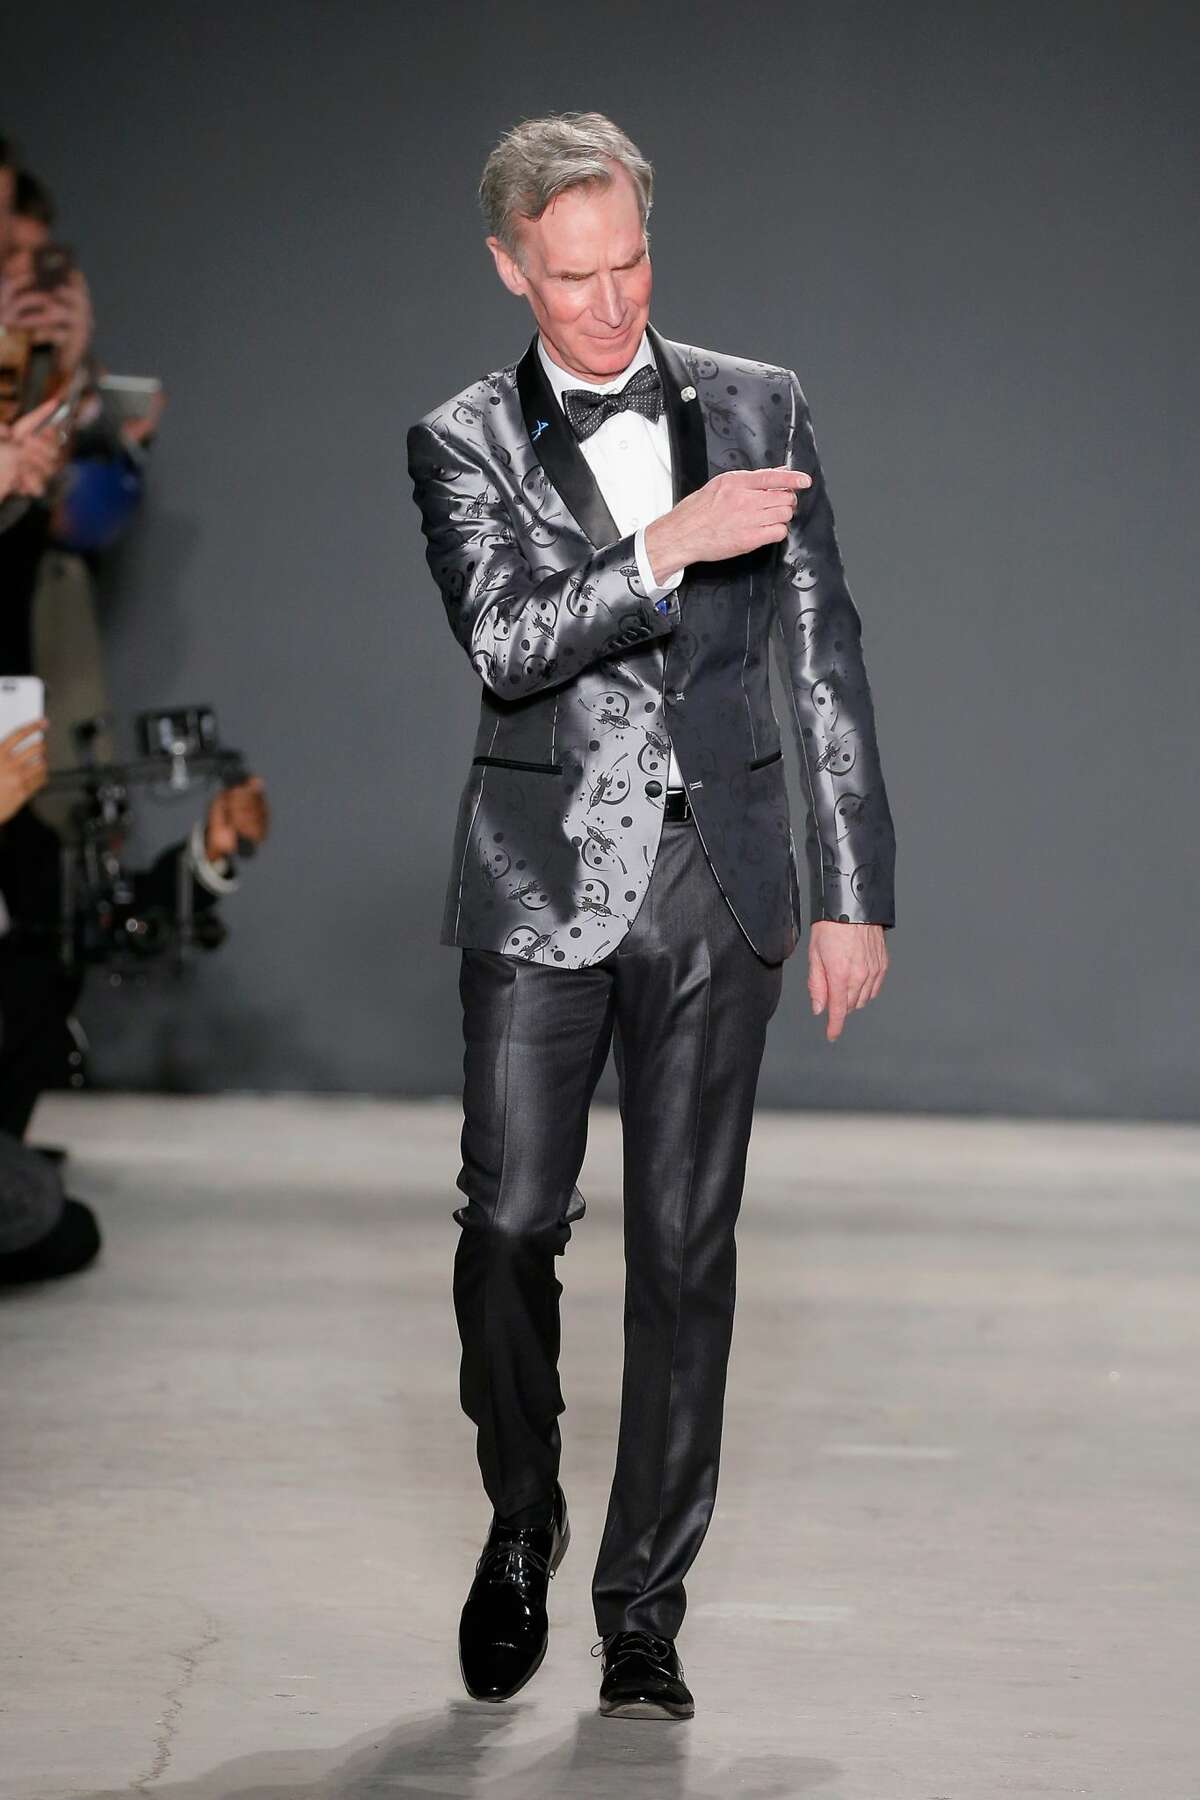 Bill Nye walks the runway at the Nick Graham NYFW Men's F/W '17 show on January 31, 2017 in New York City.